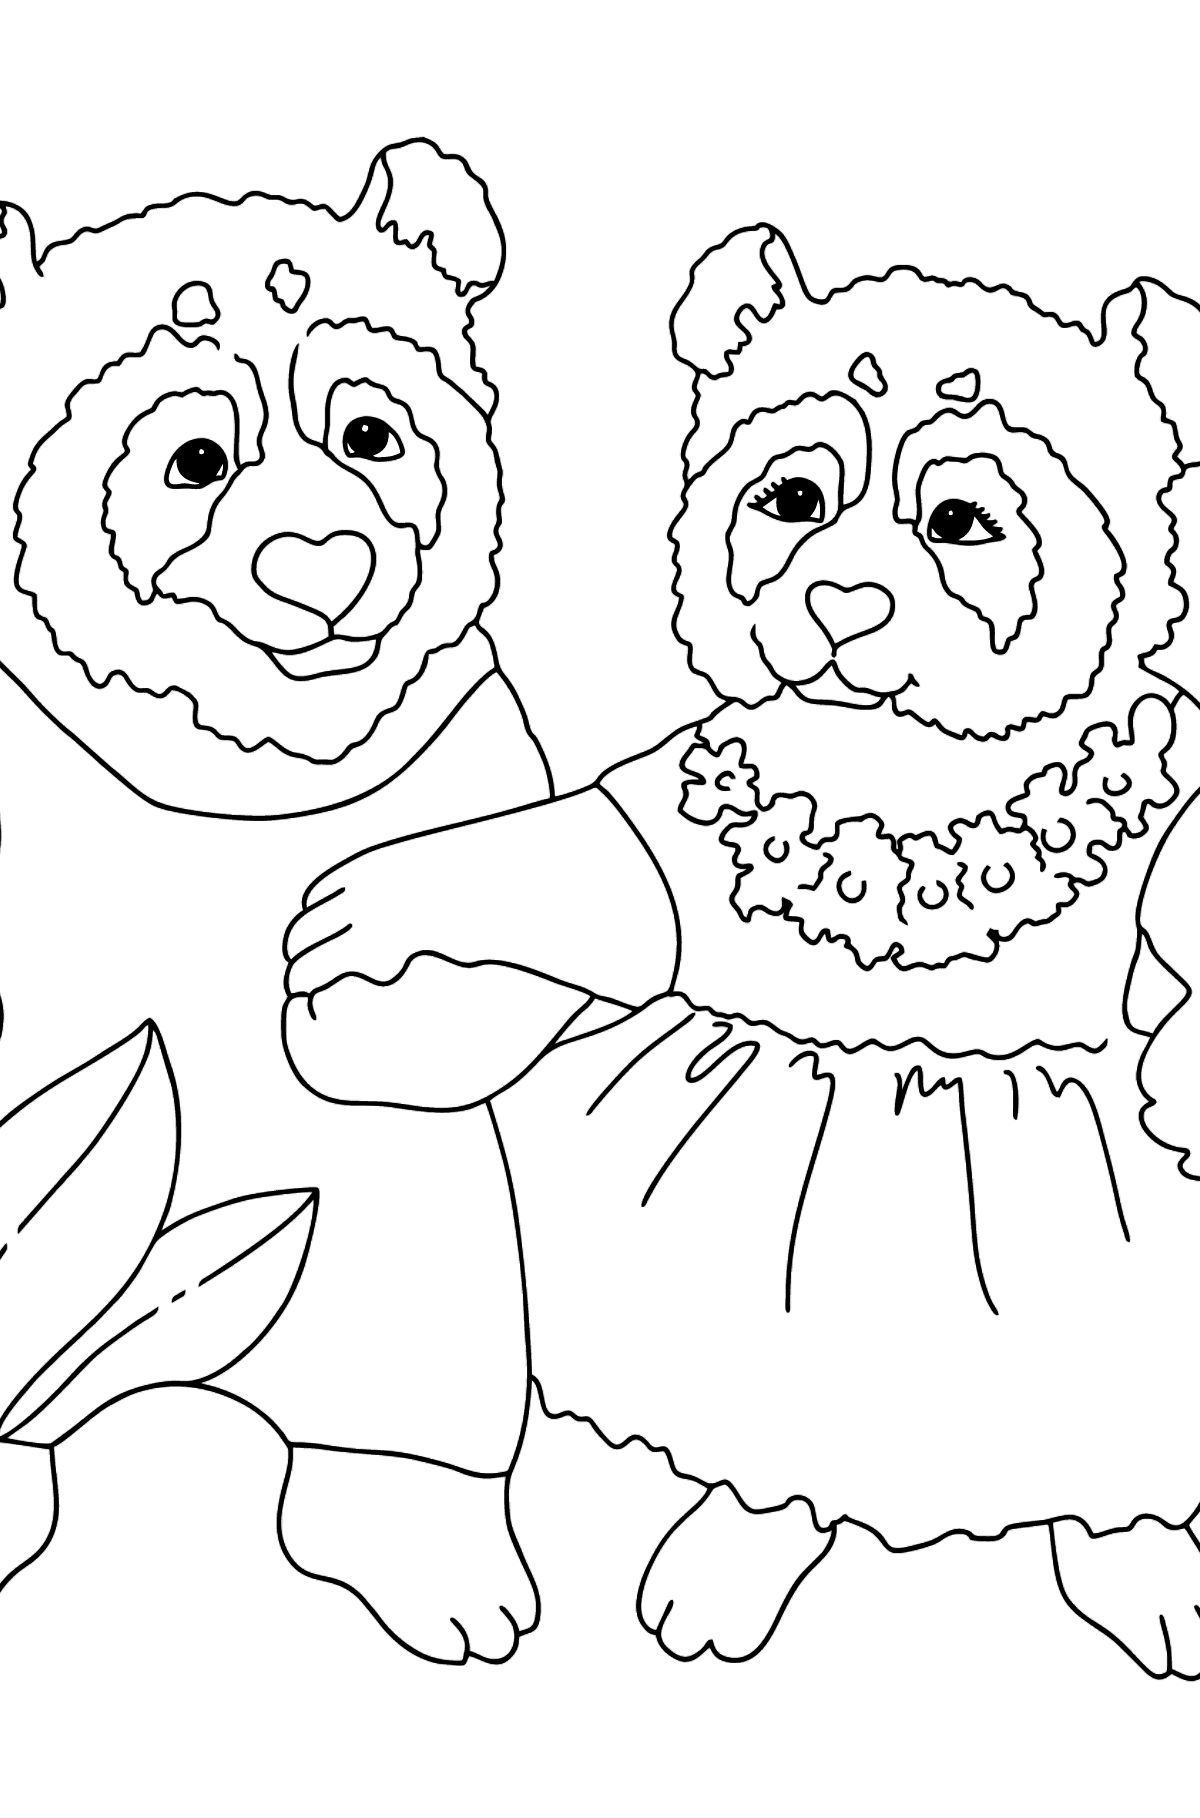 Picture Panda coloring page - Coloring Pages for Kids